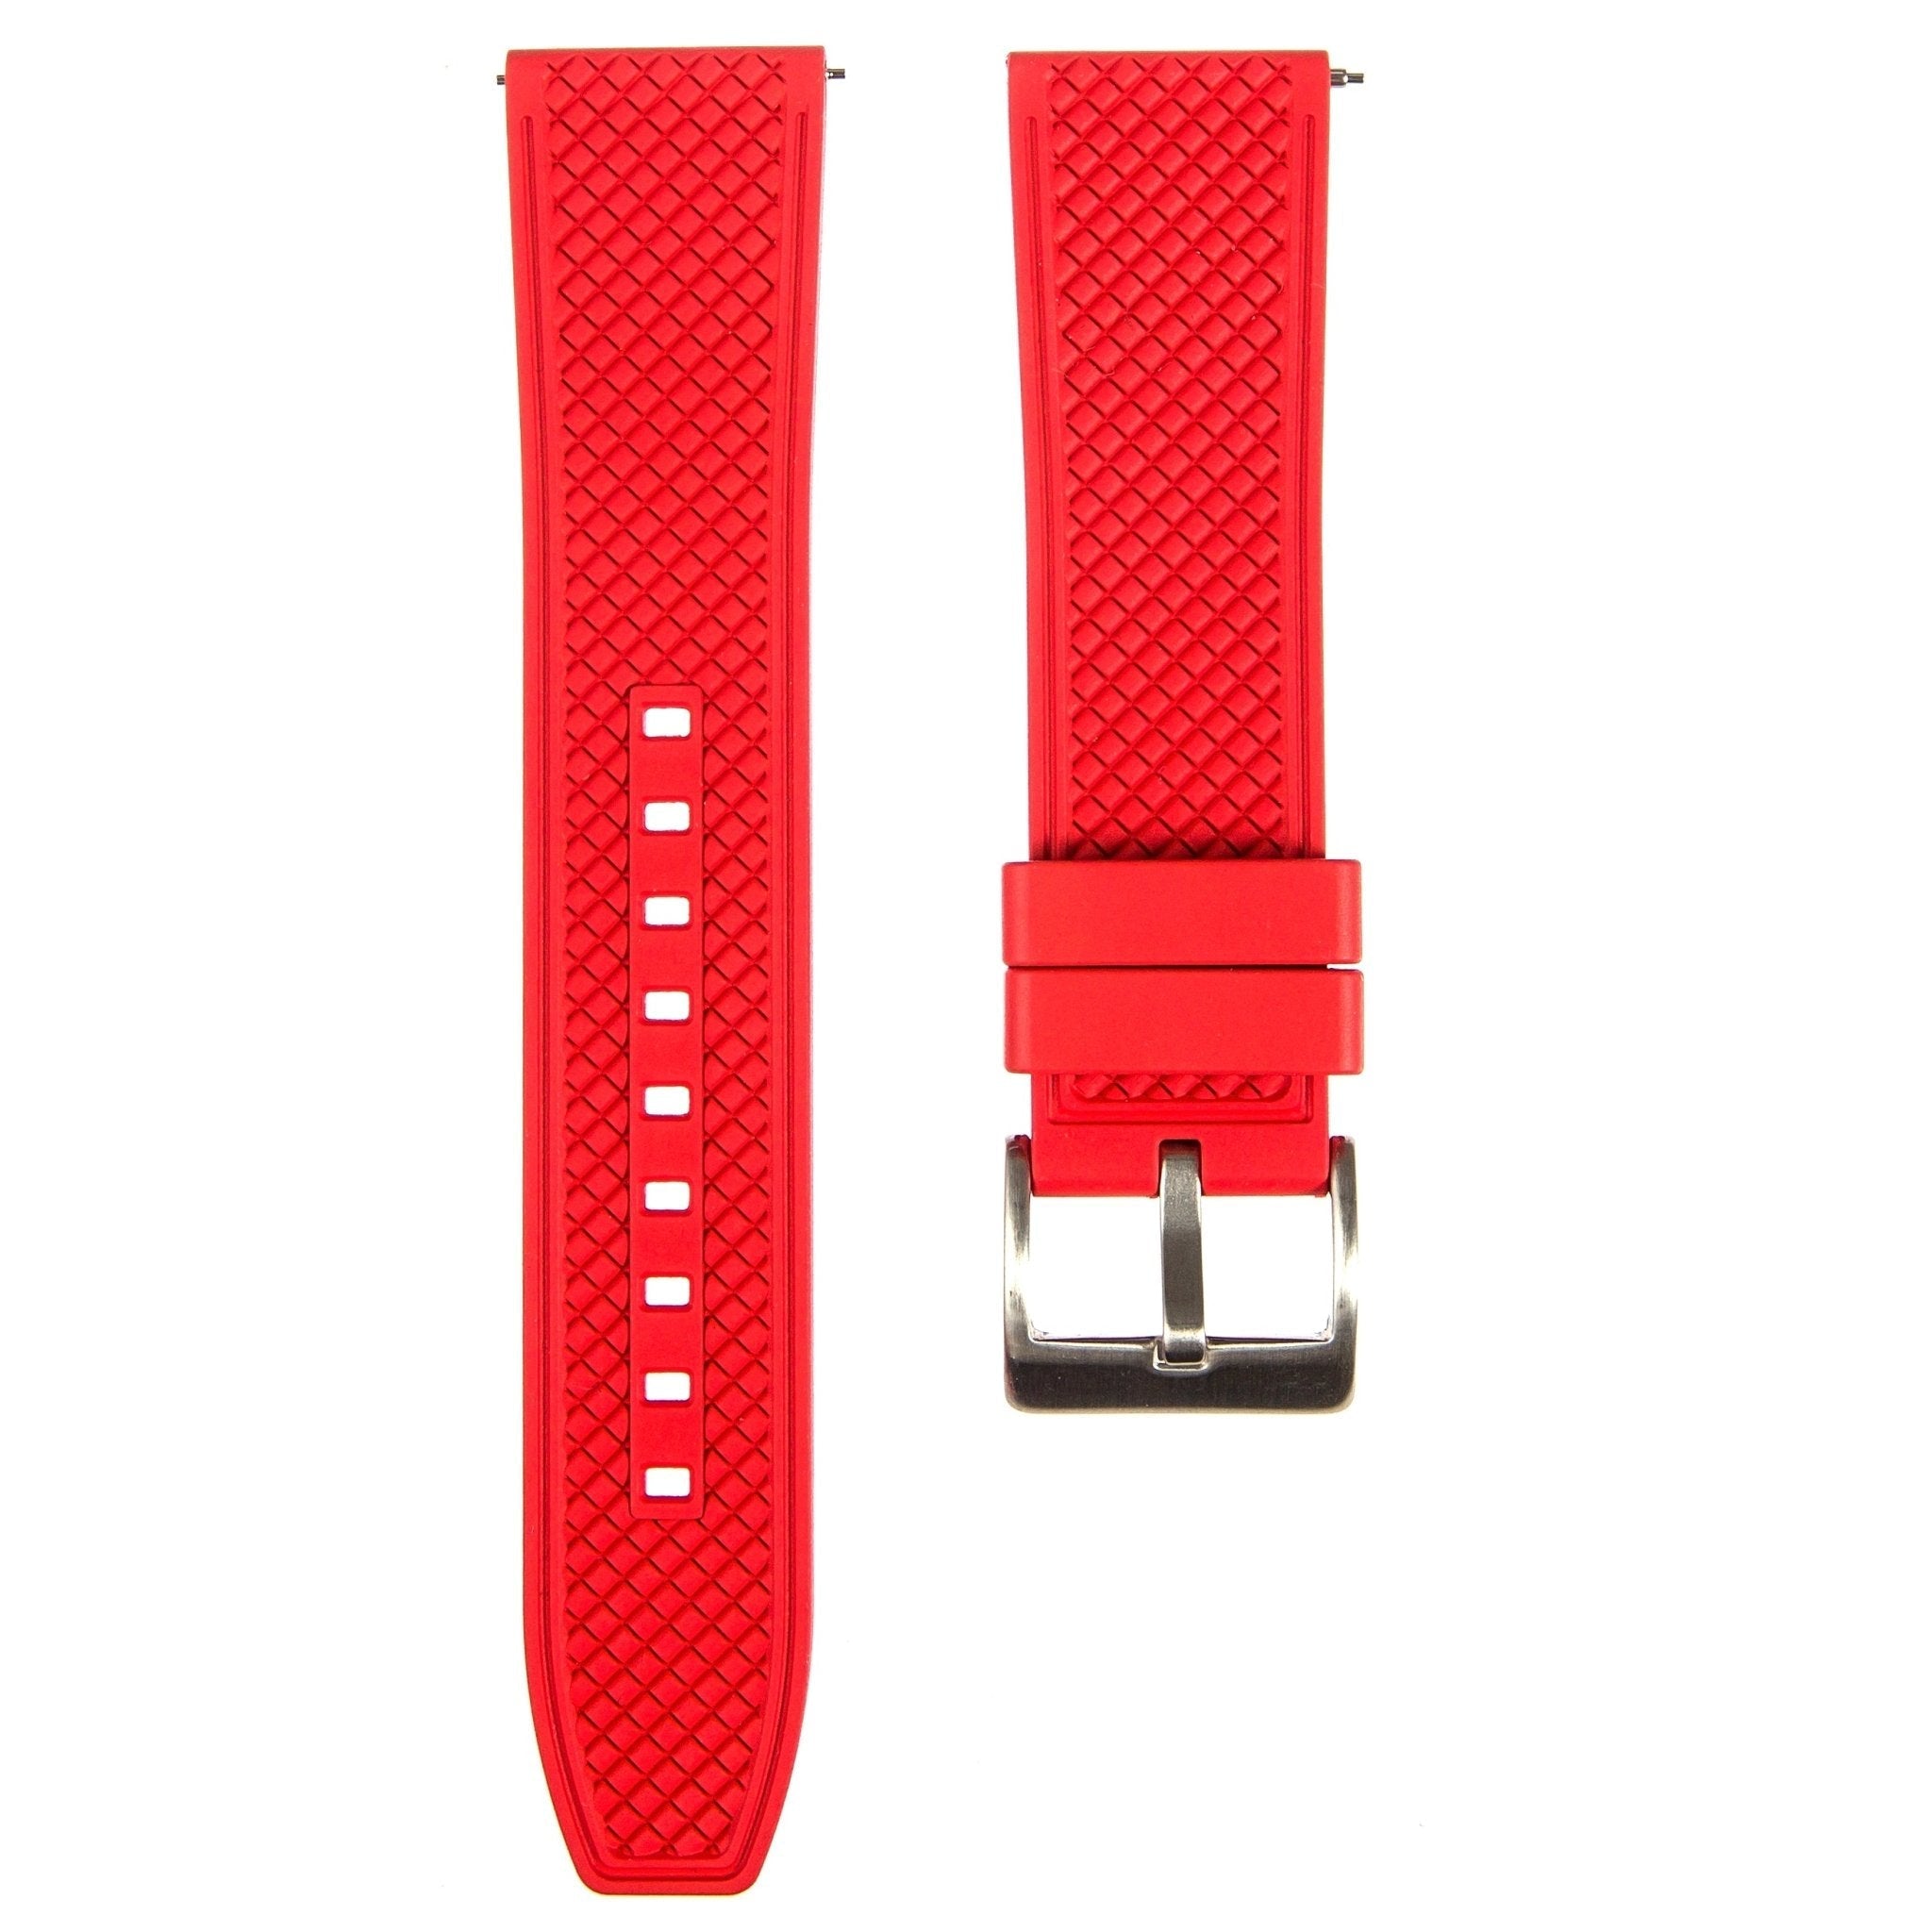 Checker Vulcanised FKM Rubber Strap-Quick-Release – Compatible with Omega Seamaster 300 – Red (2419) -StrapSeeker